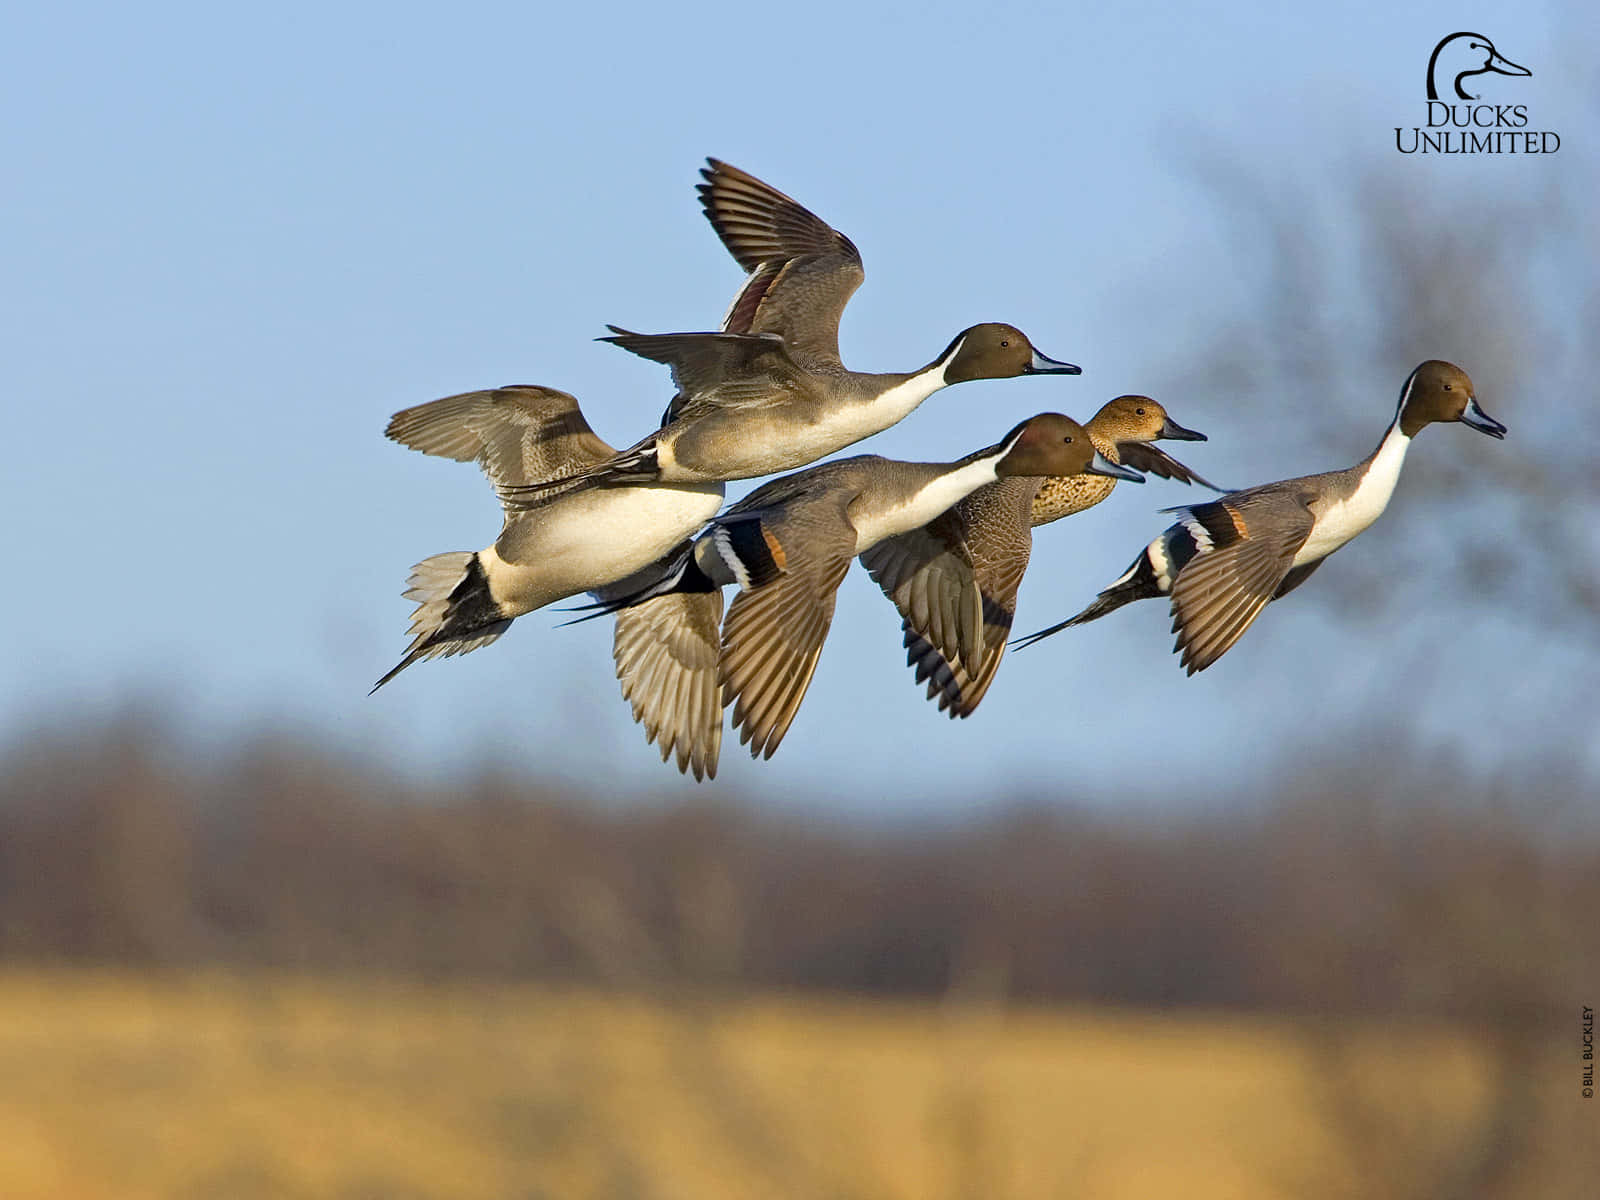 Get Ready for Duck Hunting Season with This Dynamic Desktop Wallpaper